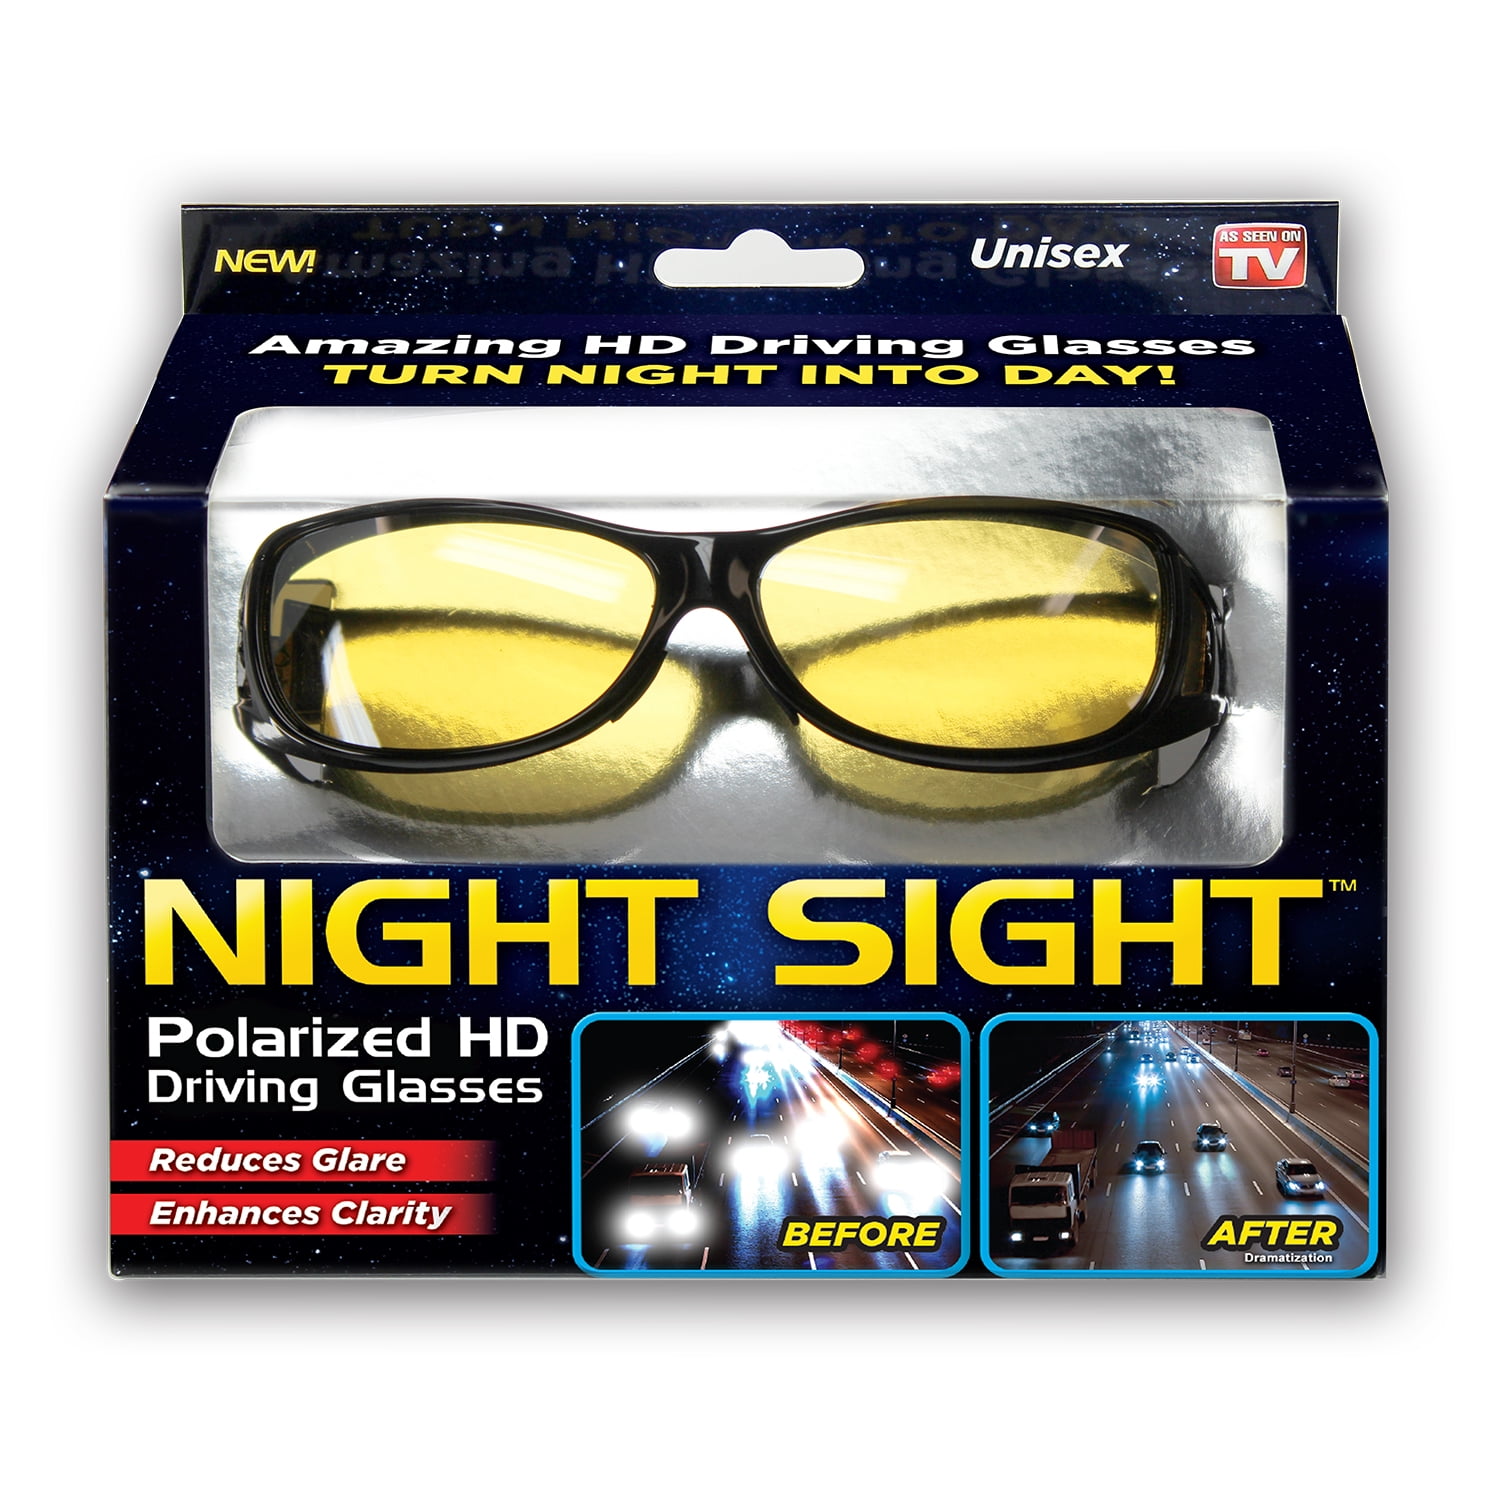 Ideal Eyewear Night Driving Wear Over Glasses Yellow Lens Fit Over Glasses